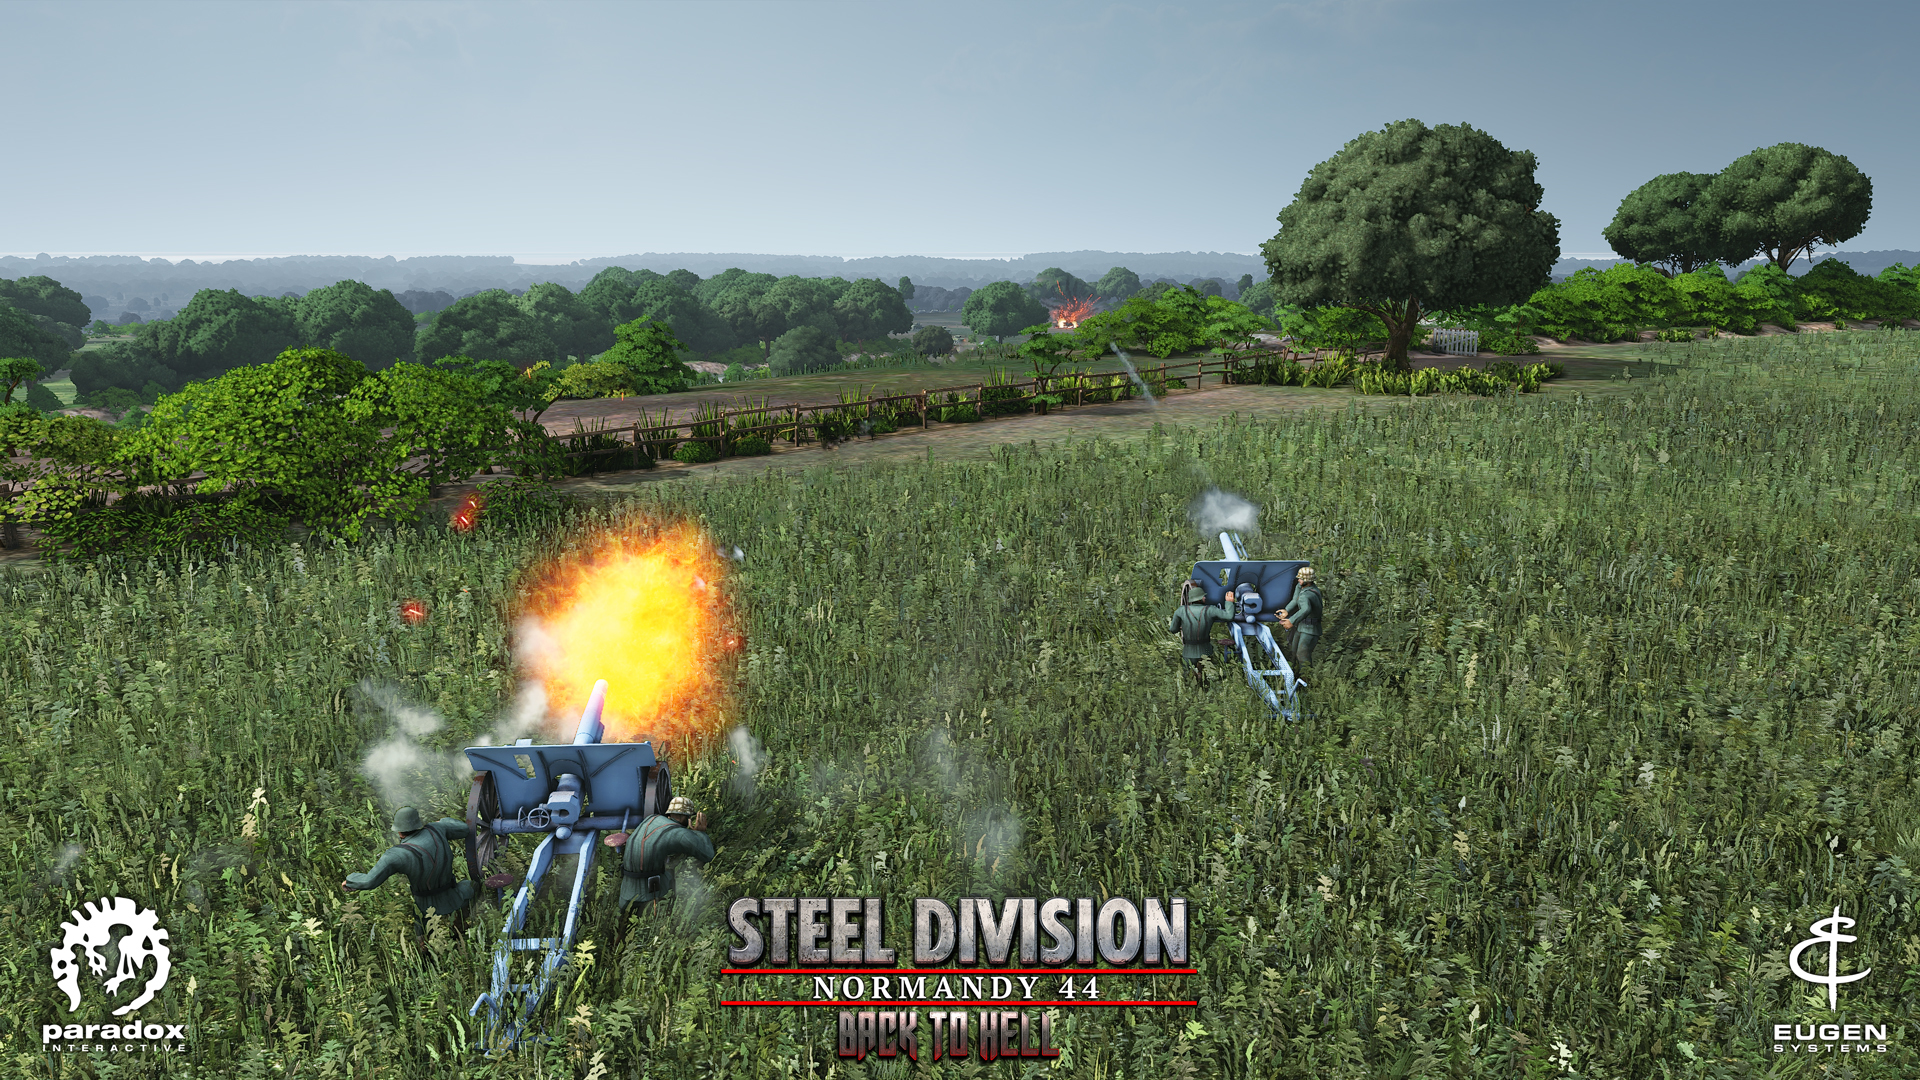 download steel division normandy 44 back to hell for free